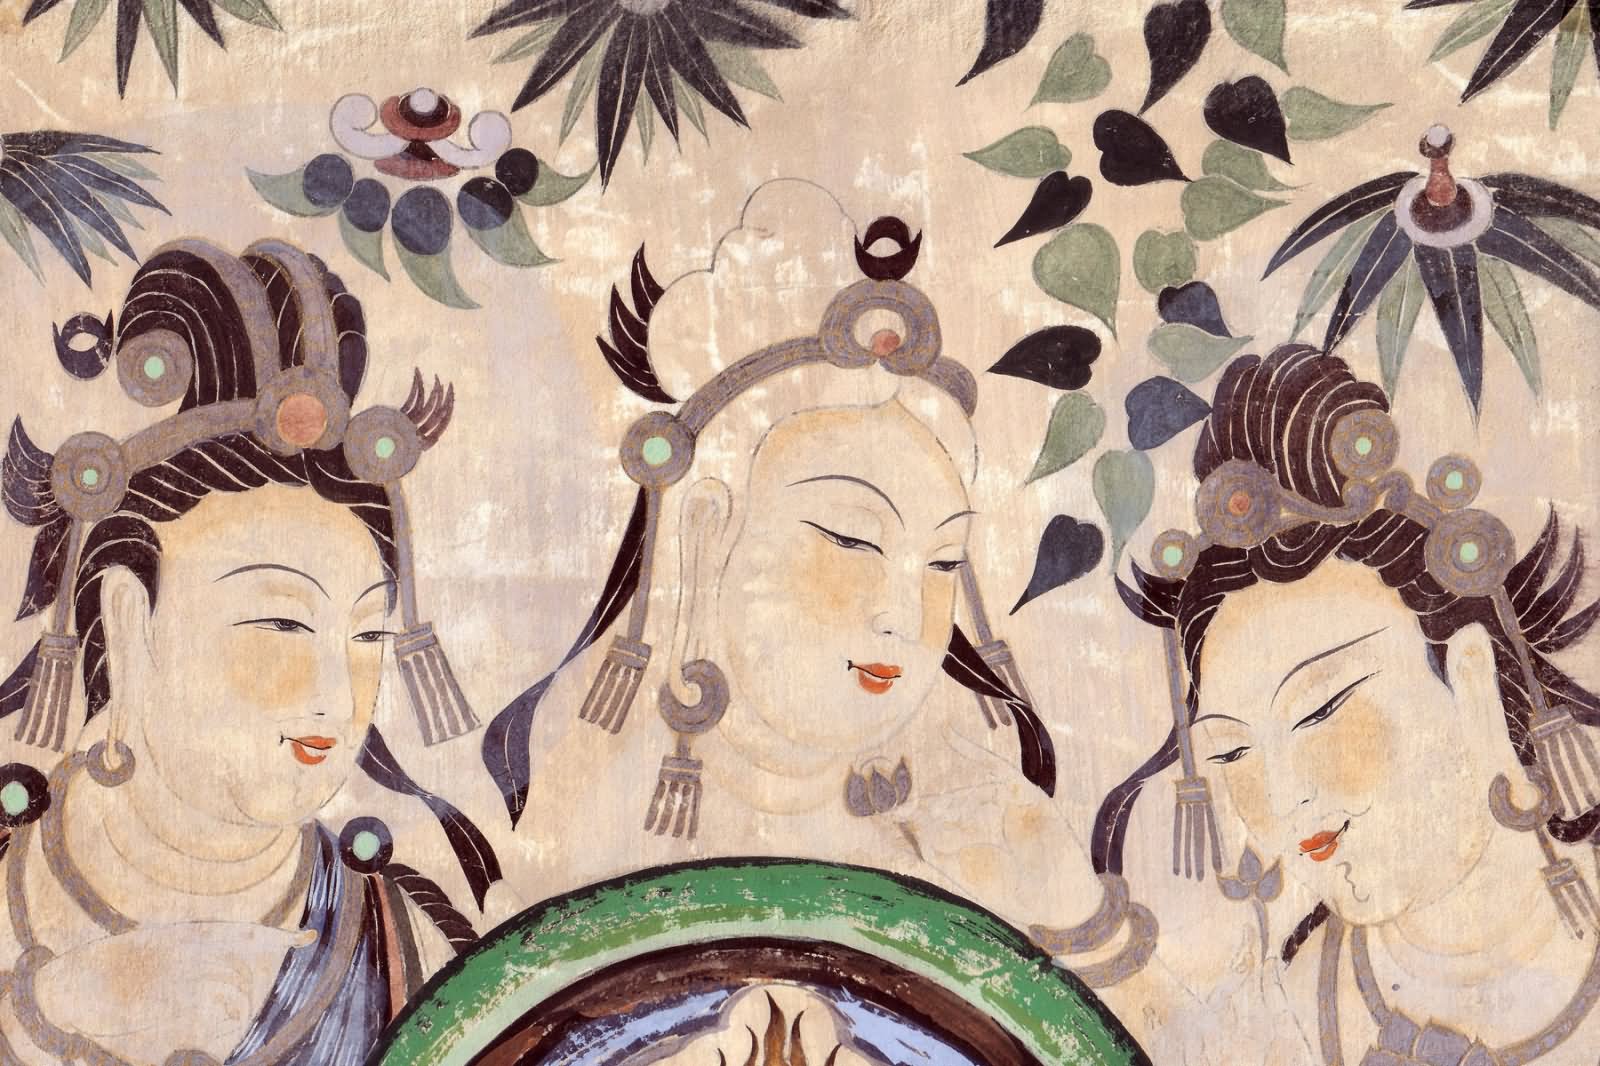 Painting At The Mogao Caves, Dunhuang